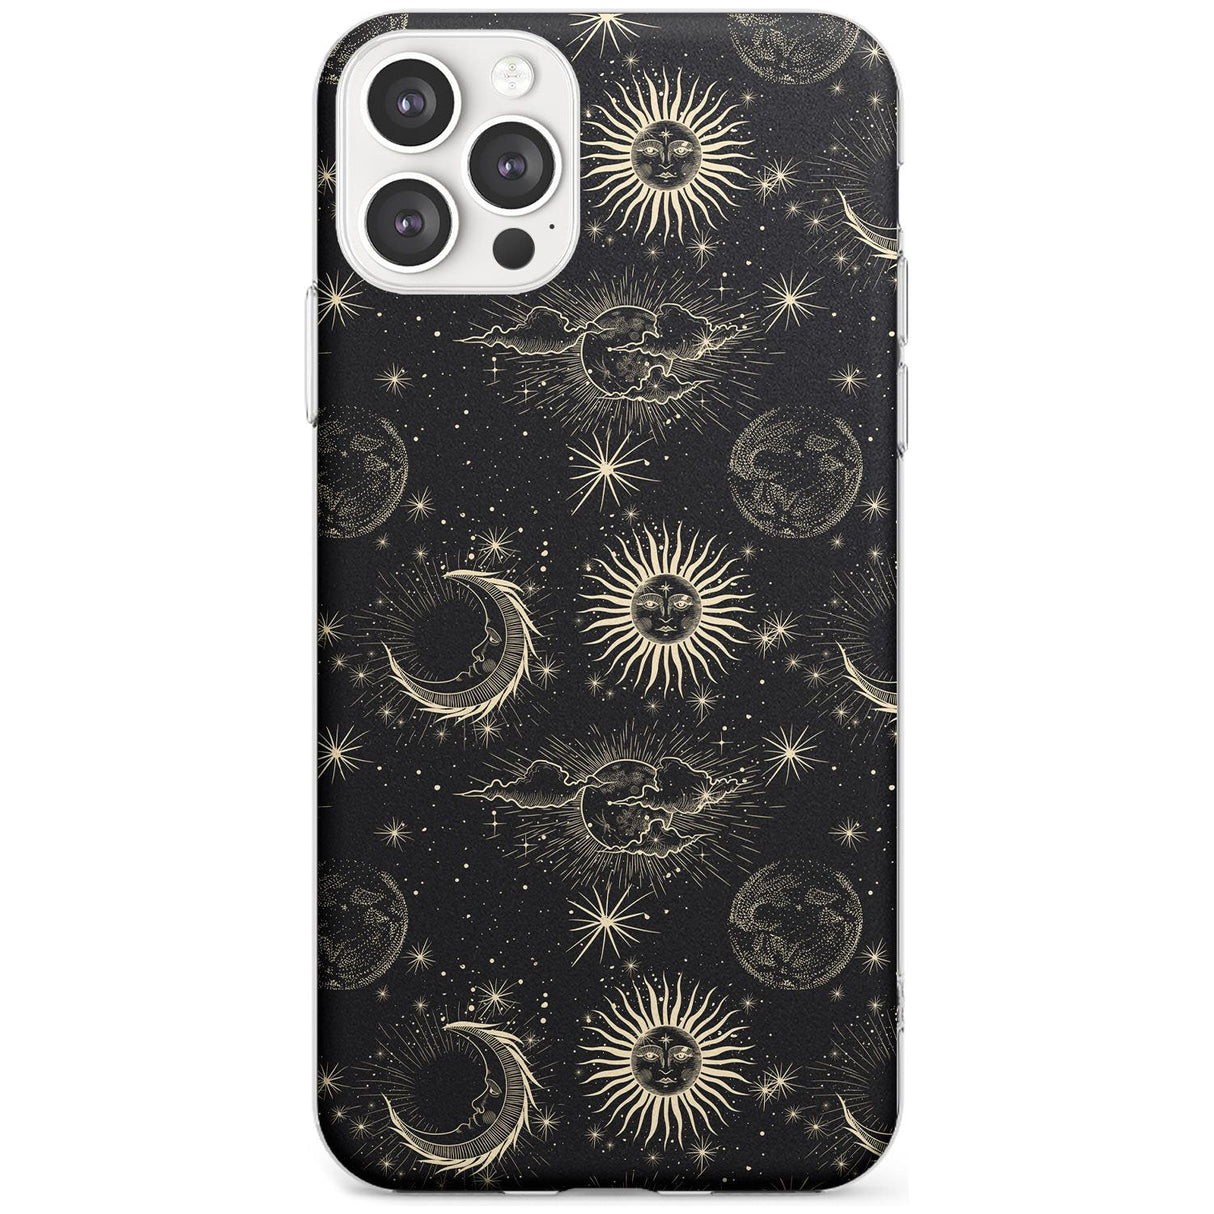 Large Suns, Moons & Clouds Black Impact Phone Case for iPhone 11 Pro Max